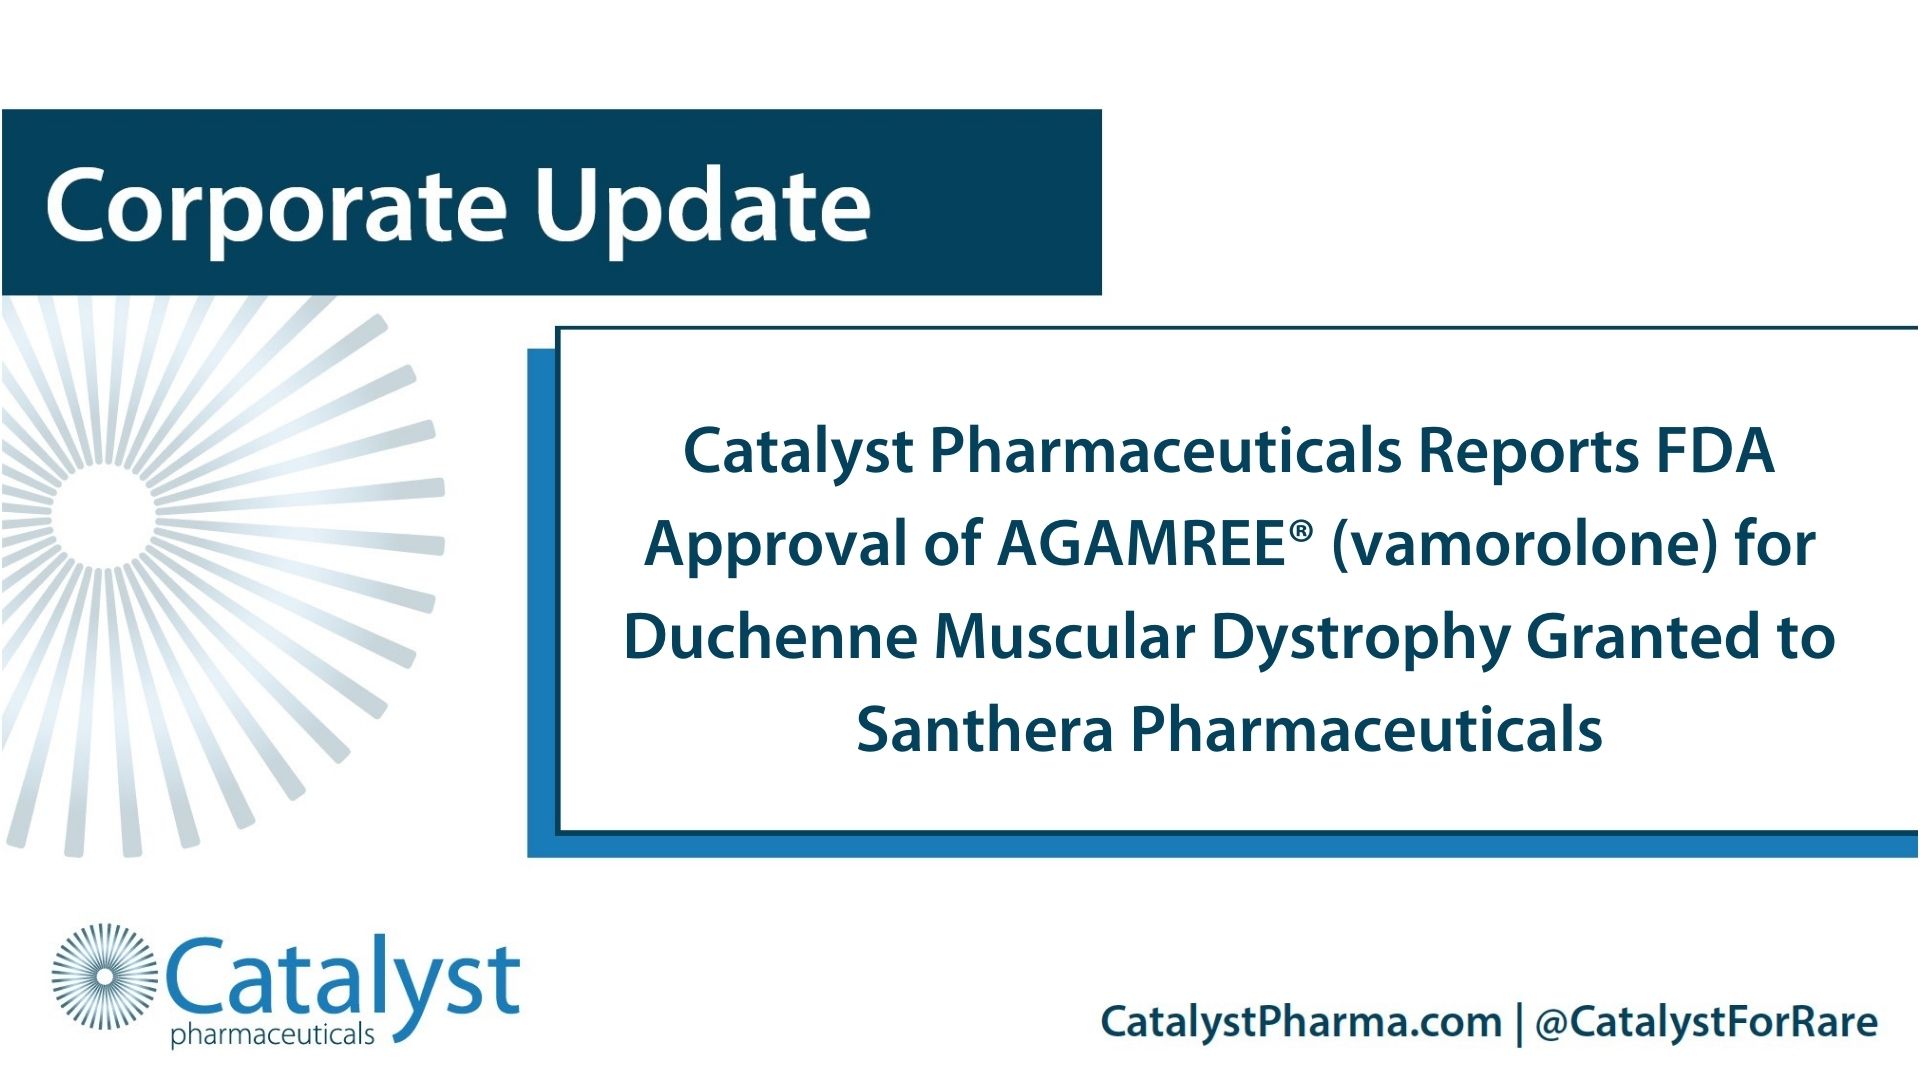 Catalyst: A Biopharmaceutical Company Focused on Rare Diseases